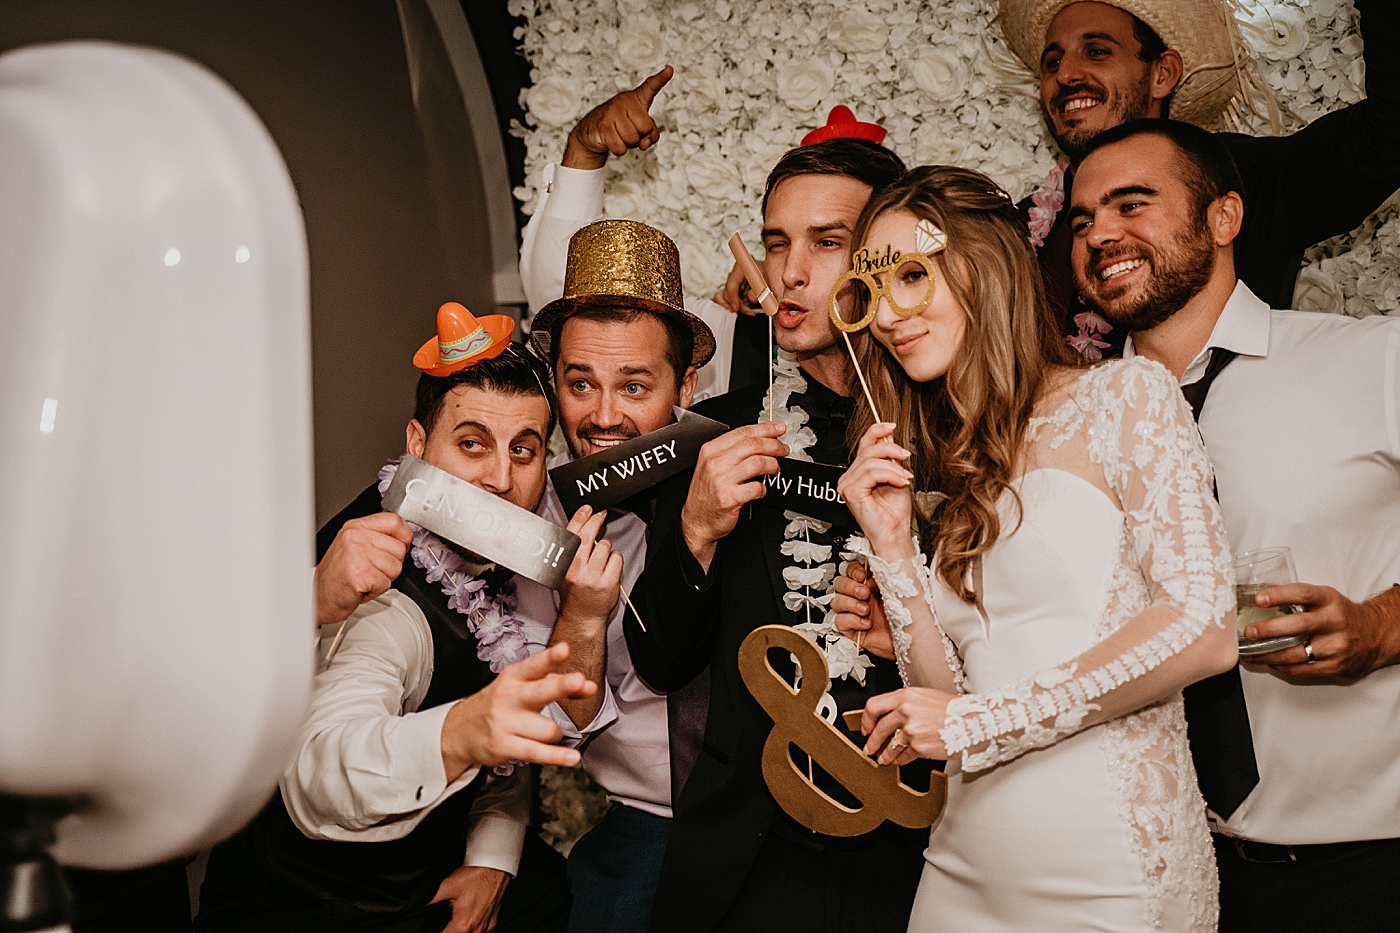 Fun Photobooth picture with decorations Waterstone Resort and Marina Wedding captured by South Florida Wedding Photographer Krystal Capone Photography